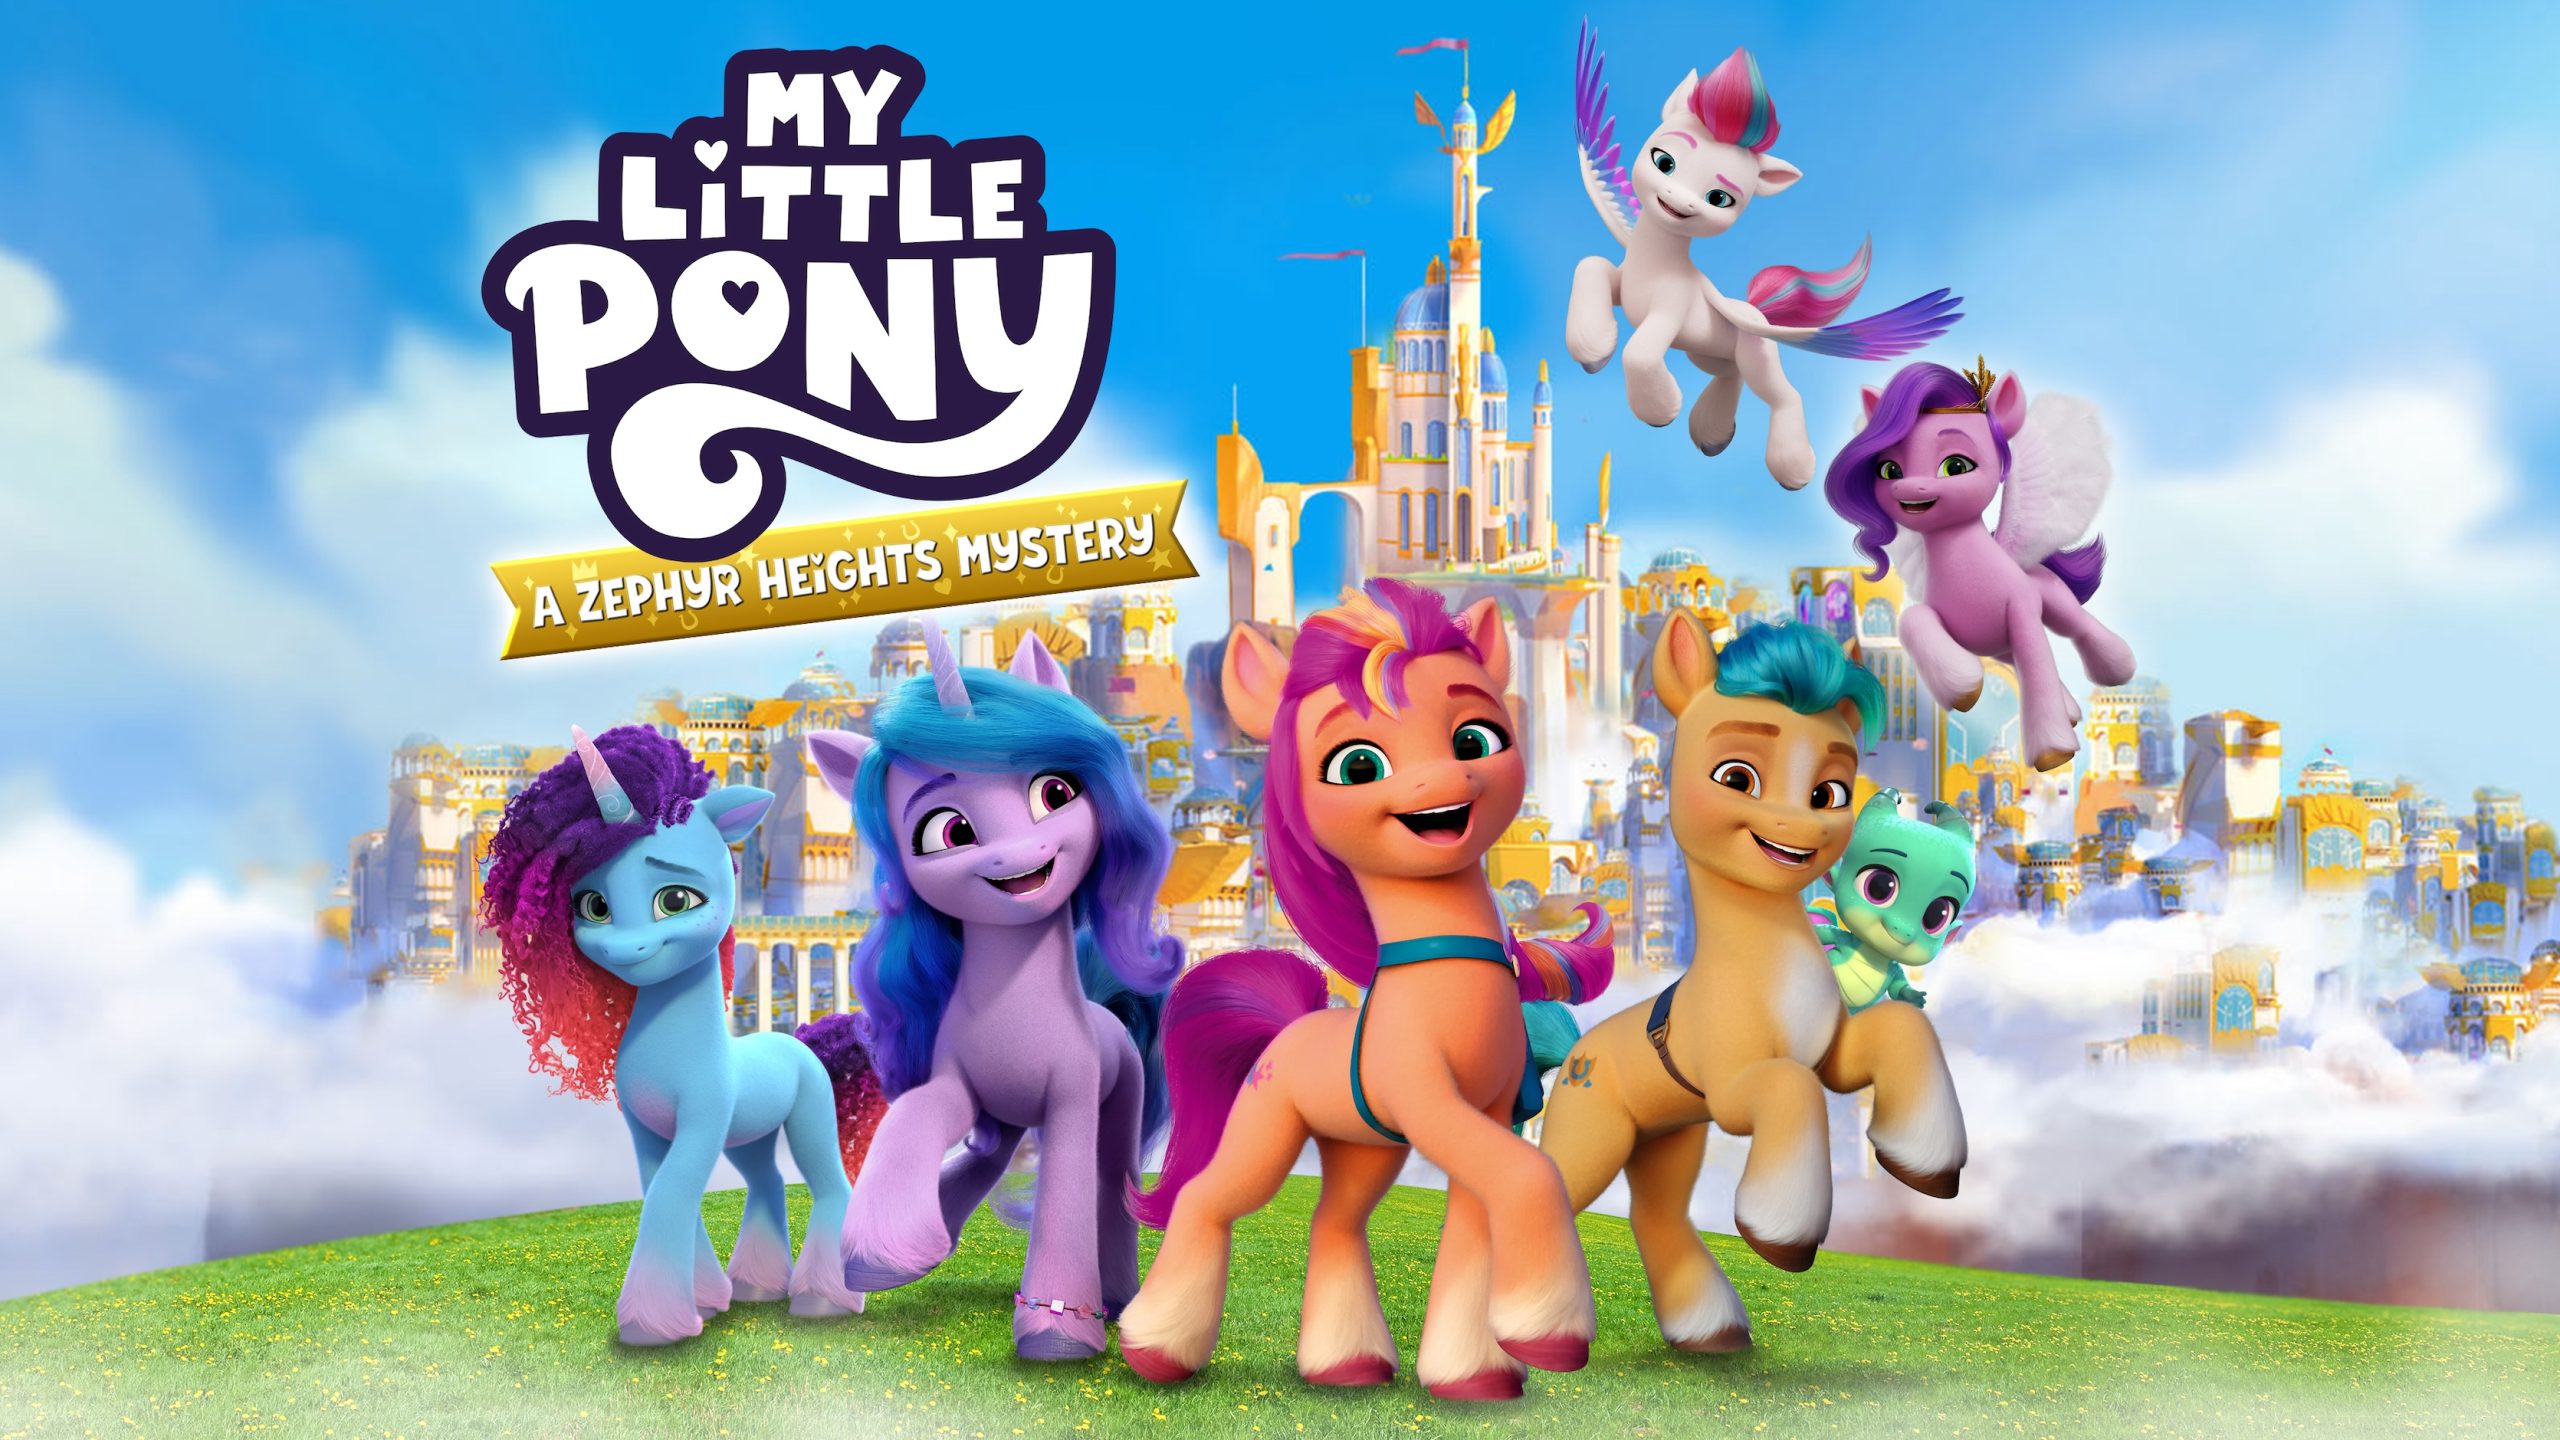 My Little Pony rides again with an all-new open-world adventure 